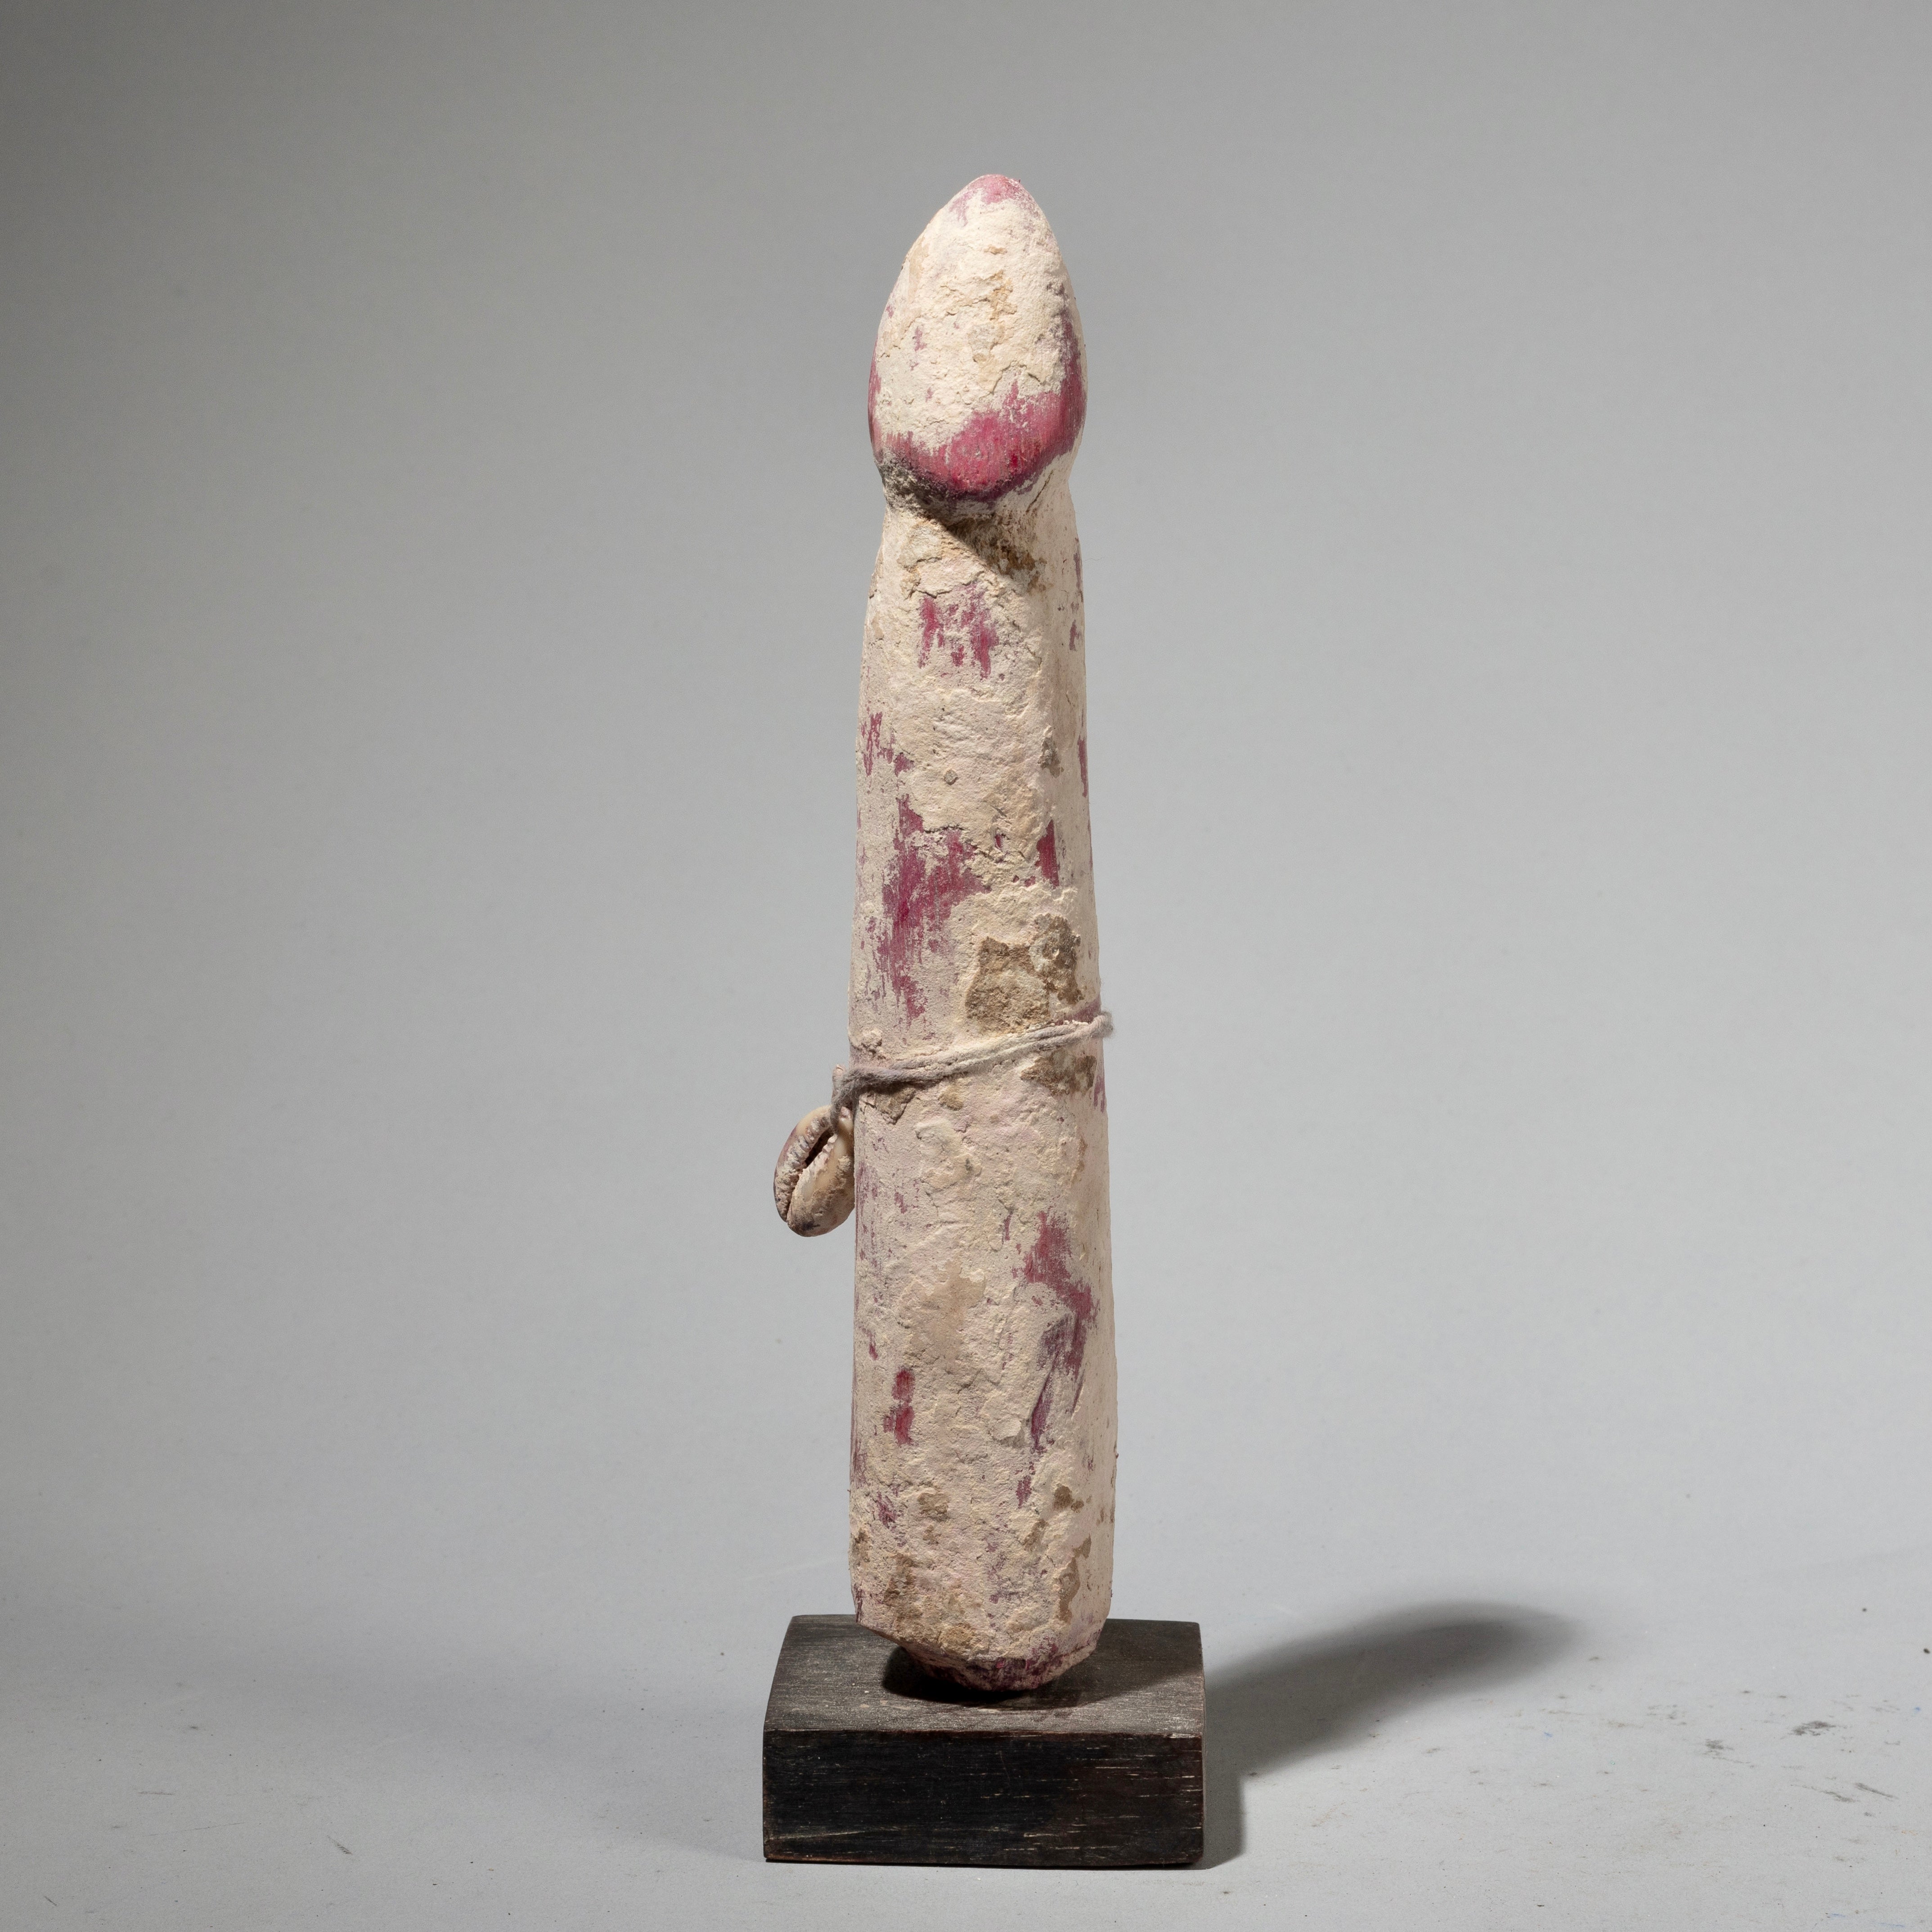 A SHAPELY PHALLIC FETISH OBJECT FROM EWE TRIBE GHANA W.AFRICA( No 1795)